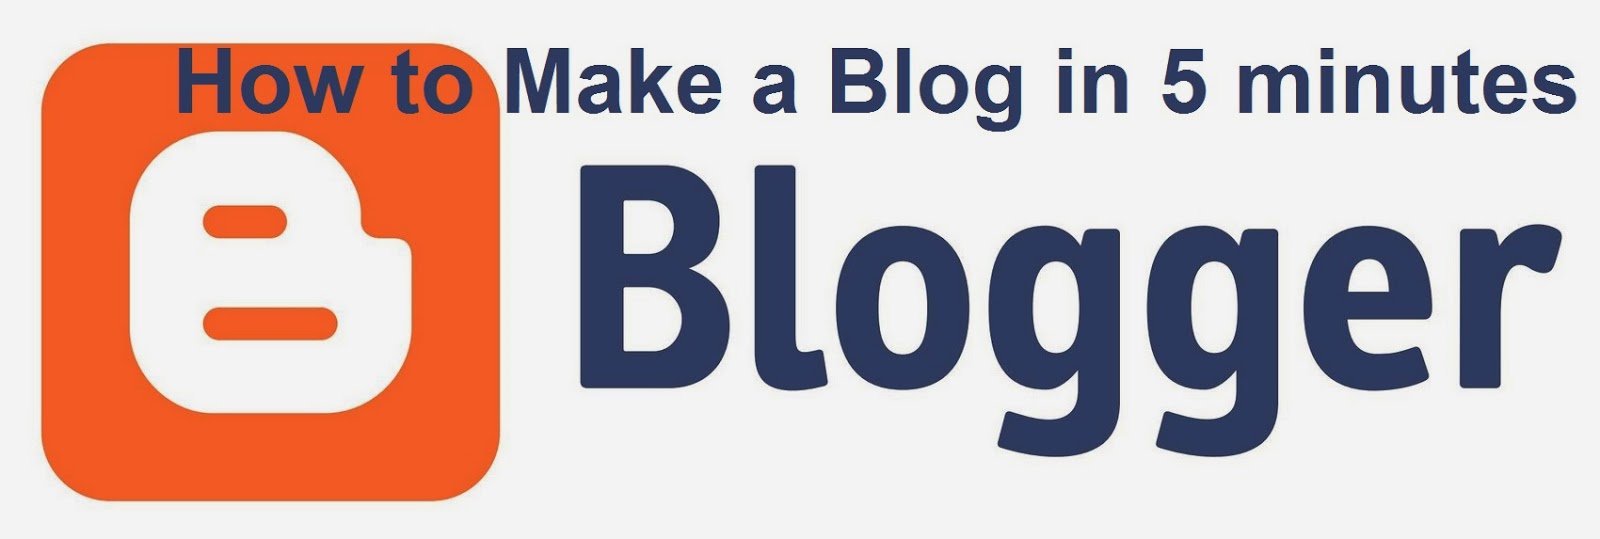 How to Make a Blog in 5 minutes : eAskme